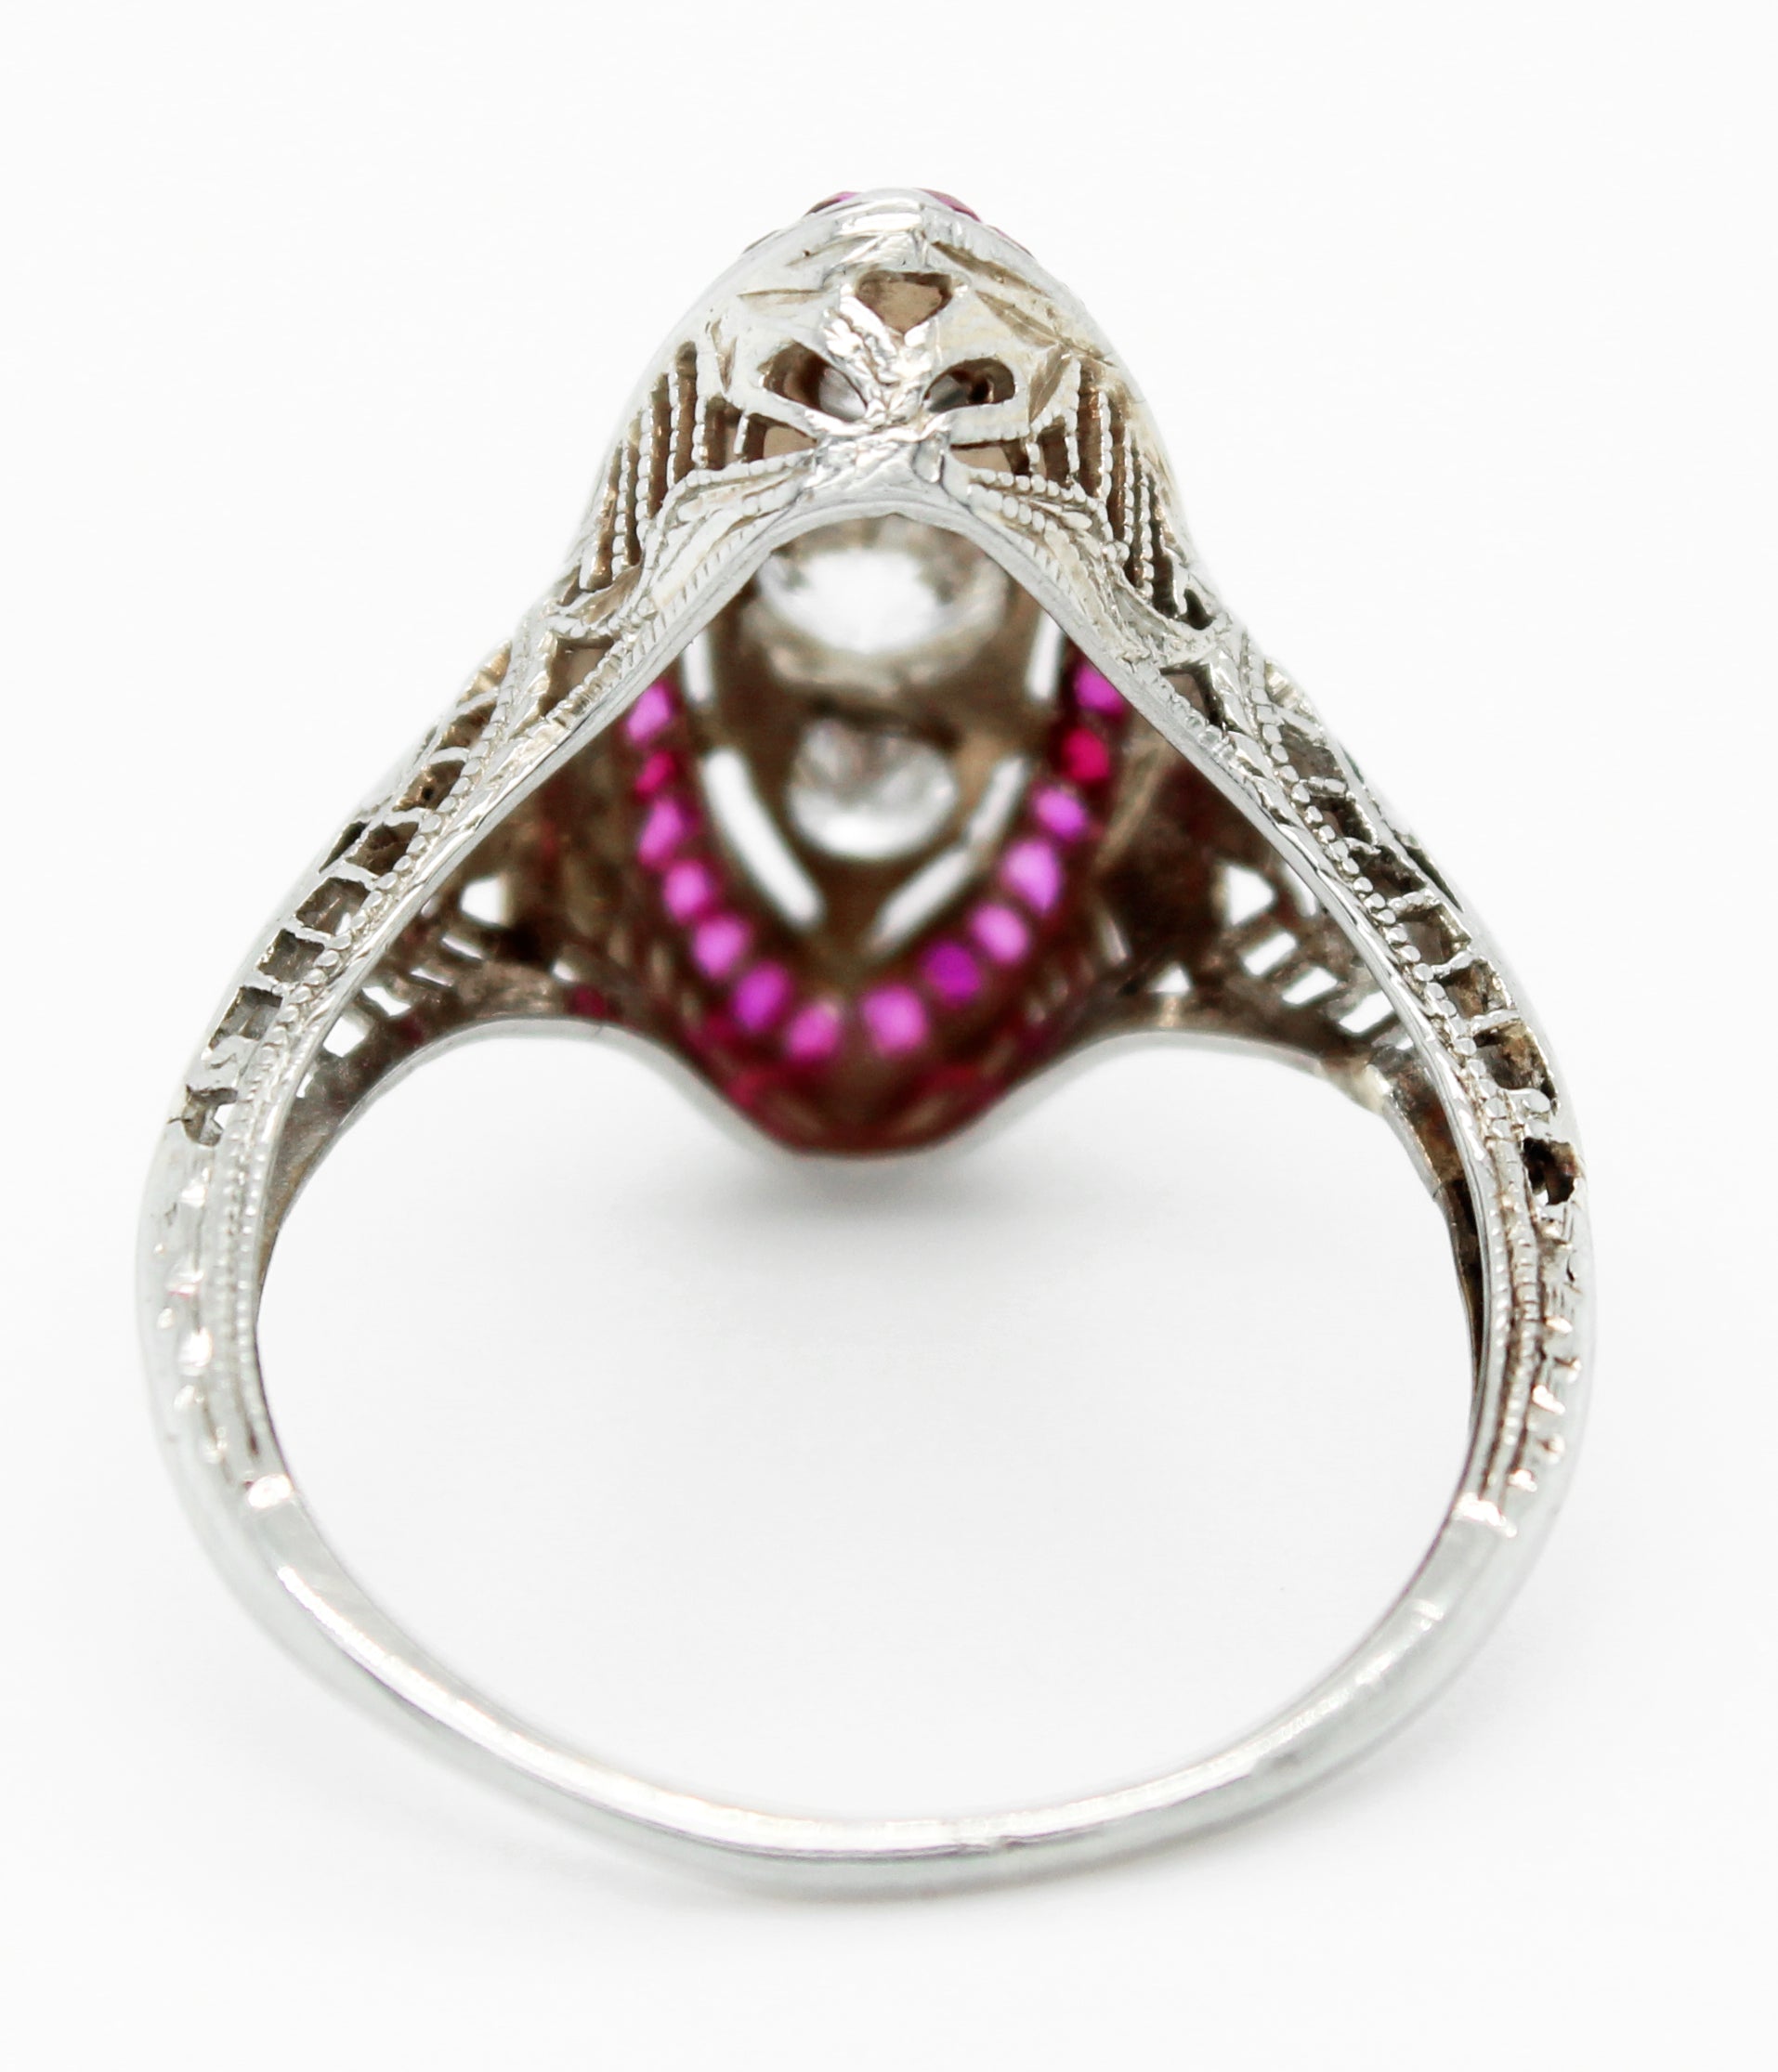 Antique Art Deco 0.50ctw Diamond & Ruby Marquise Cocktail Ring in 18k White Gold